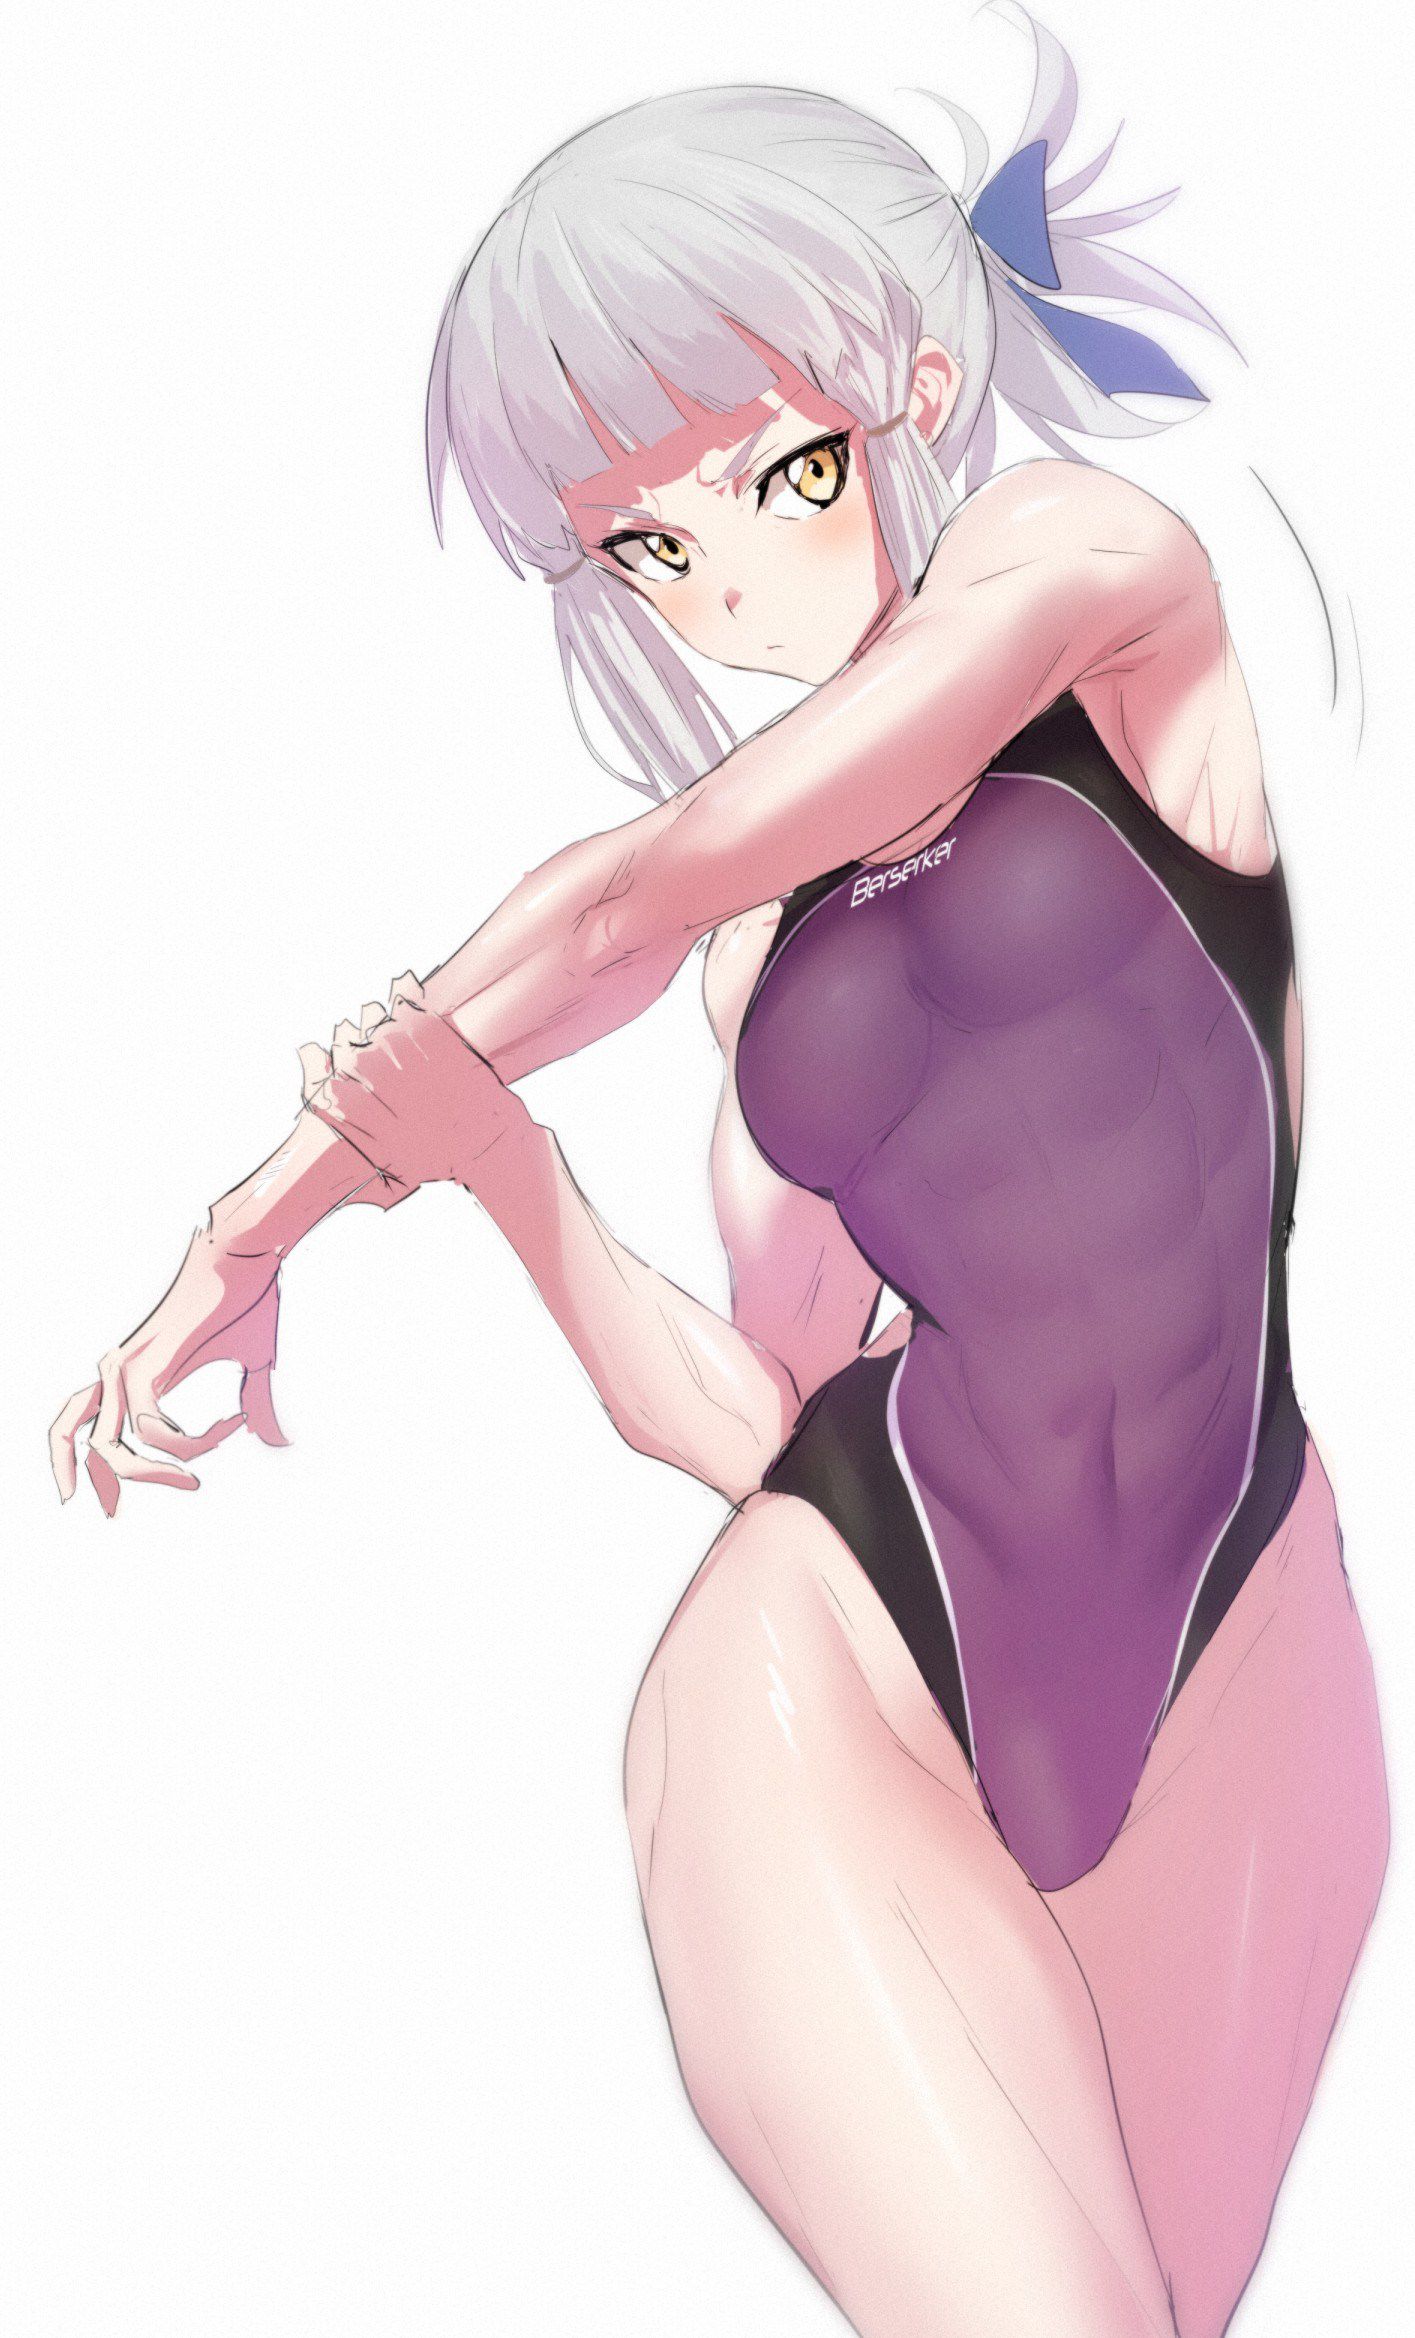 Isn't the new use of swimming swimsuits not underwater, but athletics? Two-dimensional erotic image of a sexy girl in a swimsuit that makes you think 25